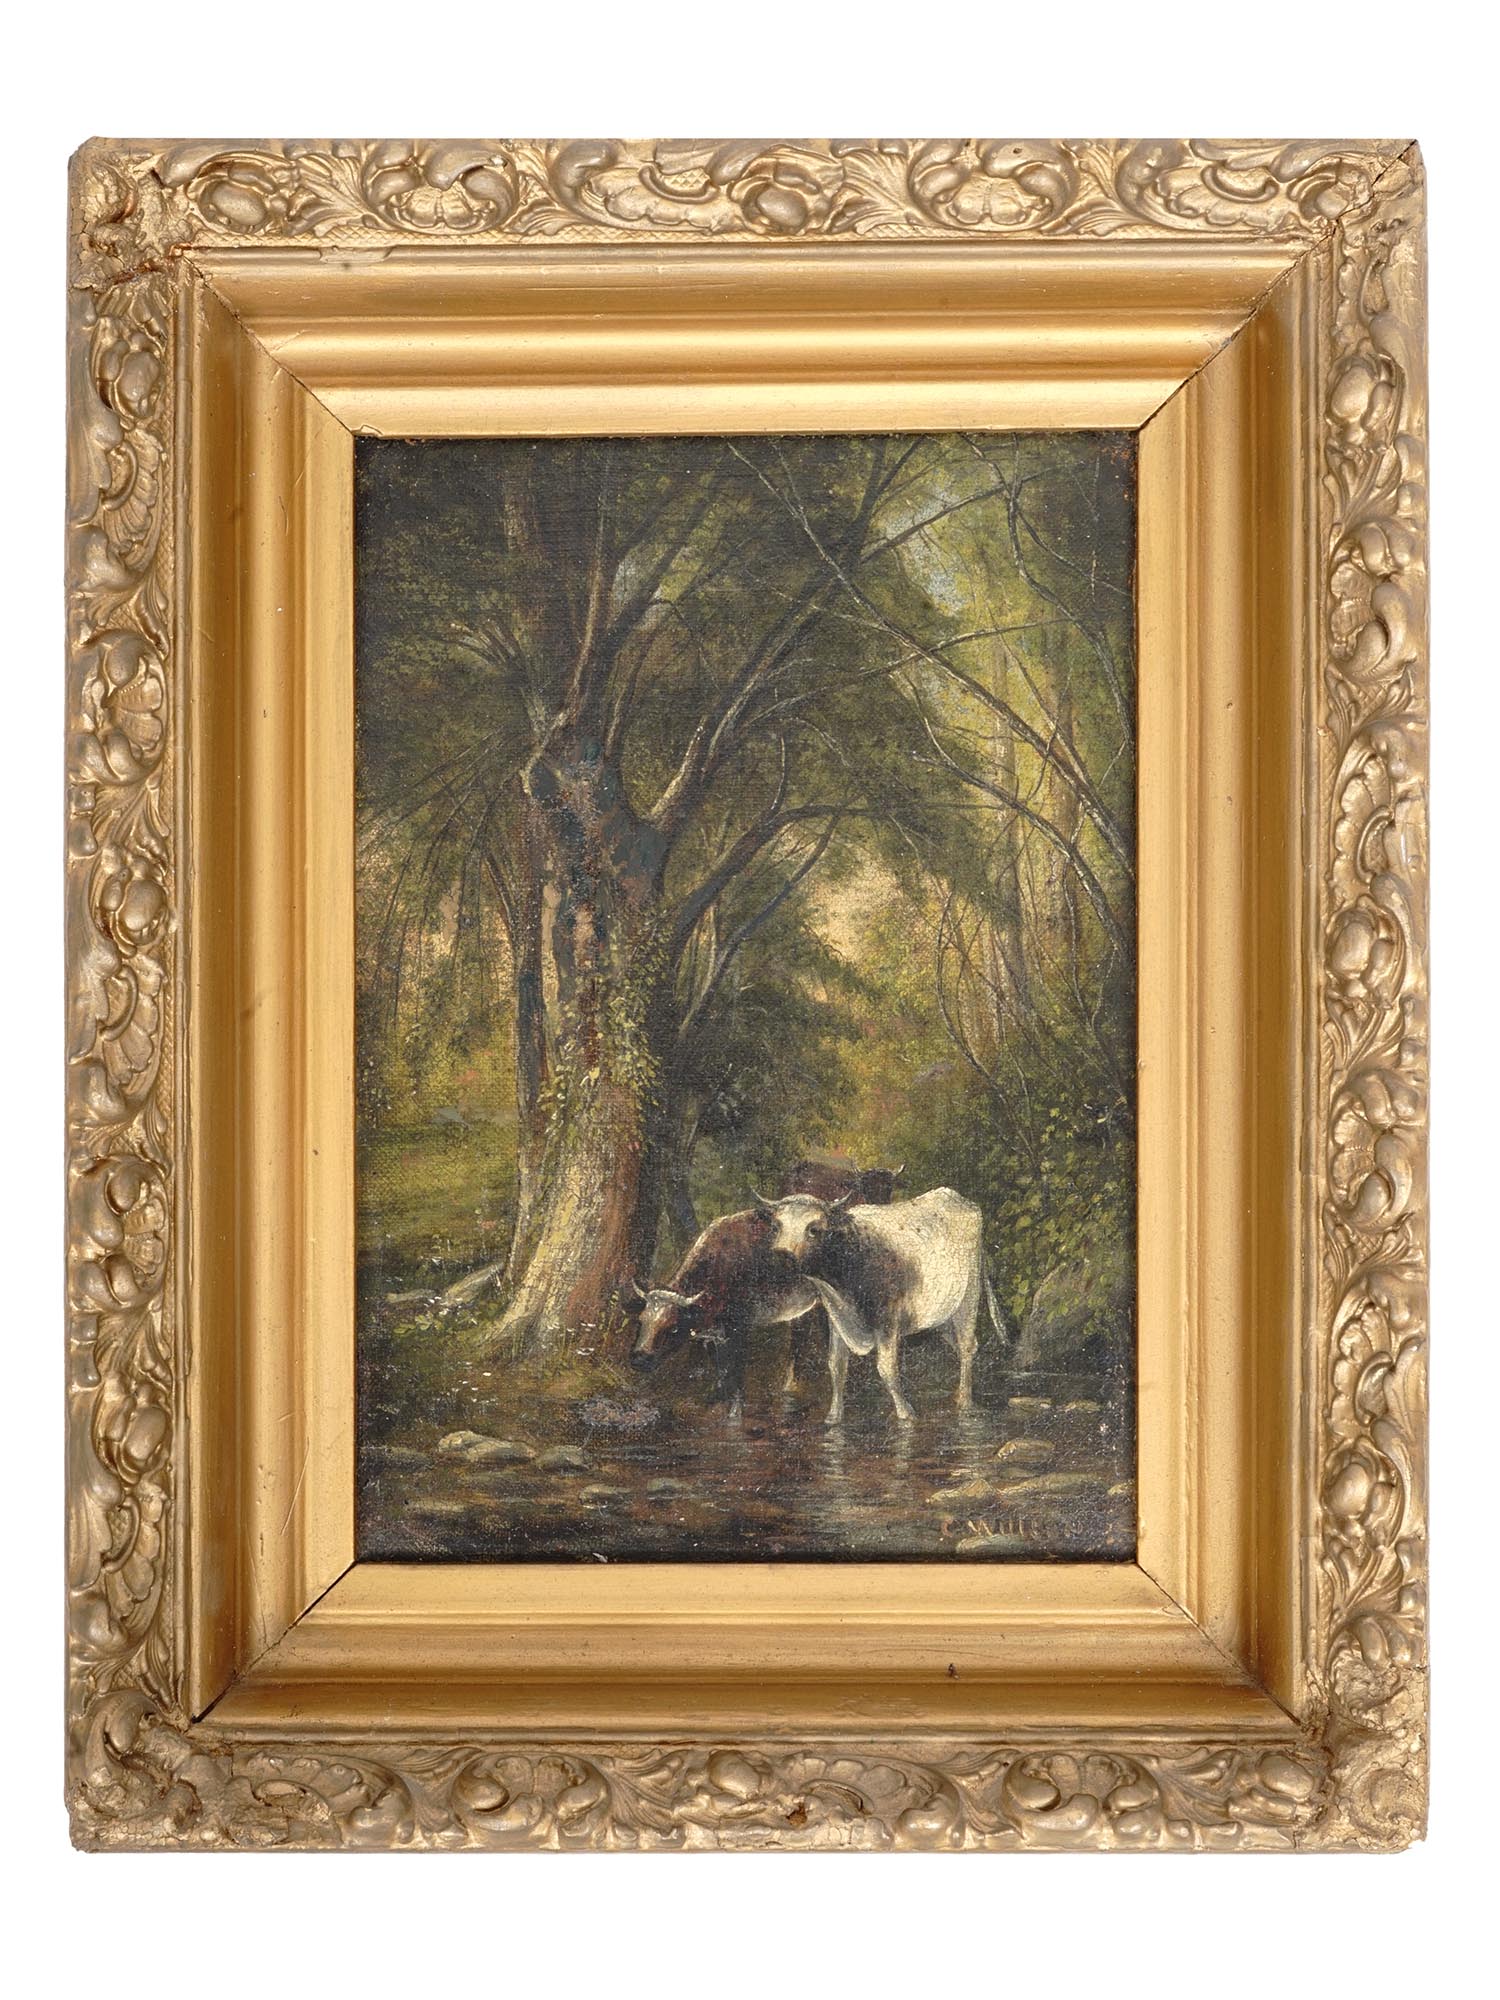 ANTIQUE GERMAN PASTORAL SCENE OIL PAINTING SIGNED PIC-0